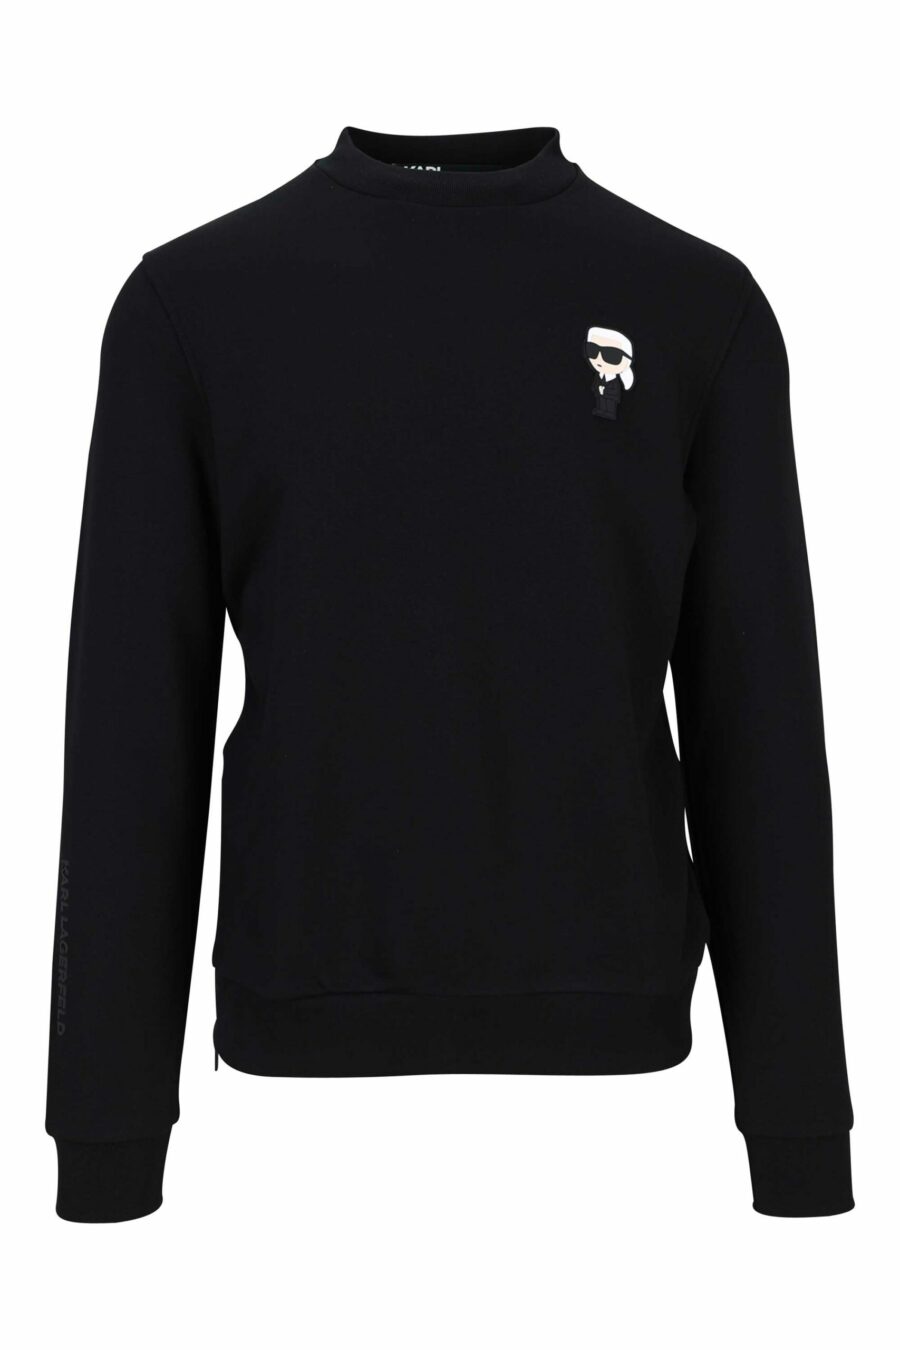 Black sweatshirt with embroidered minilogue - 4062226652995 1 scaled